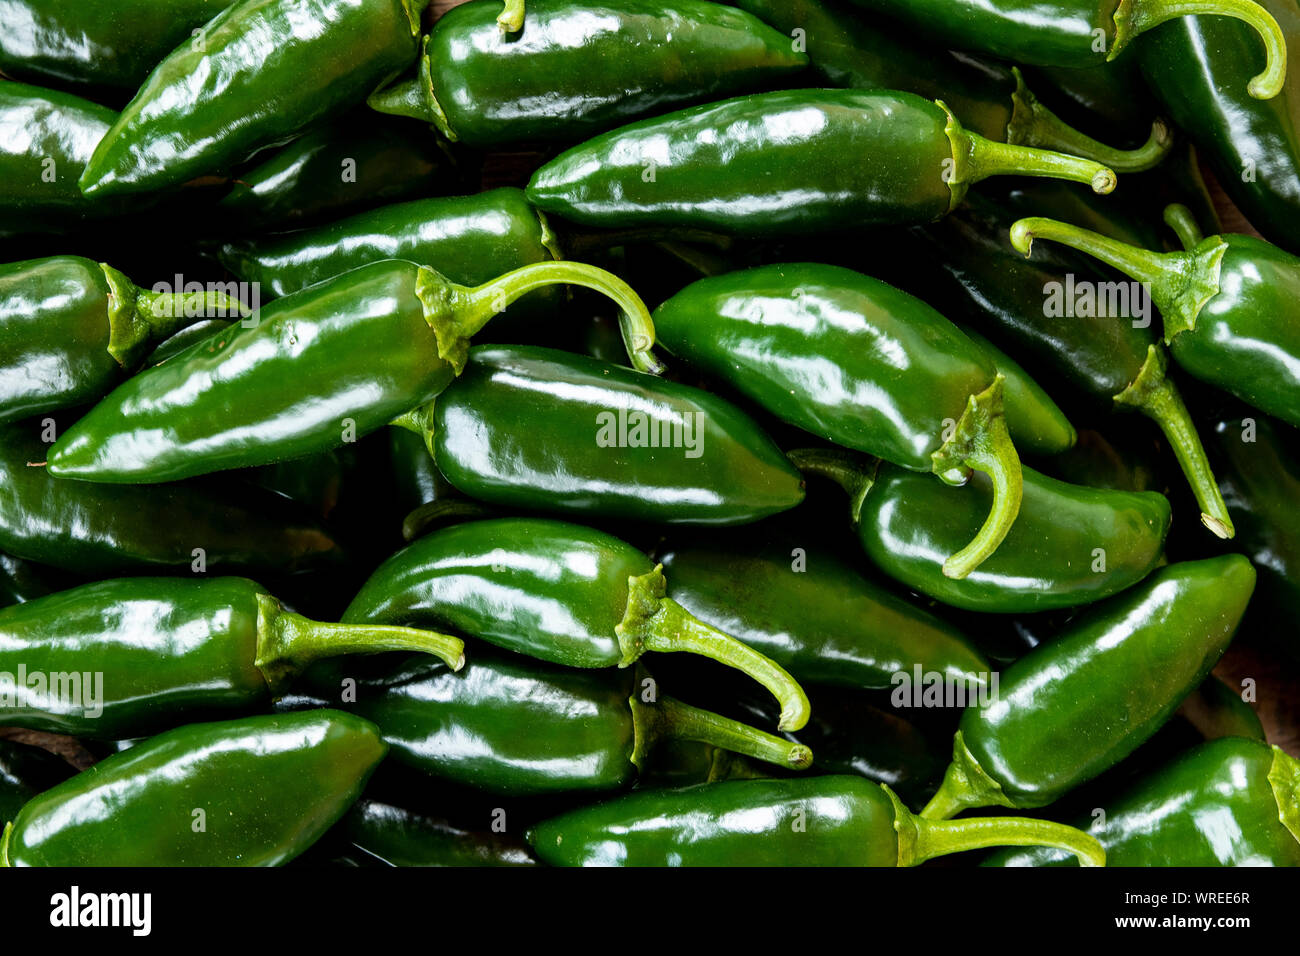 Heap of organic jalapeno peppers Stock Photo